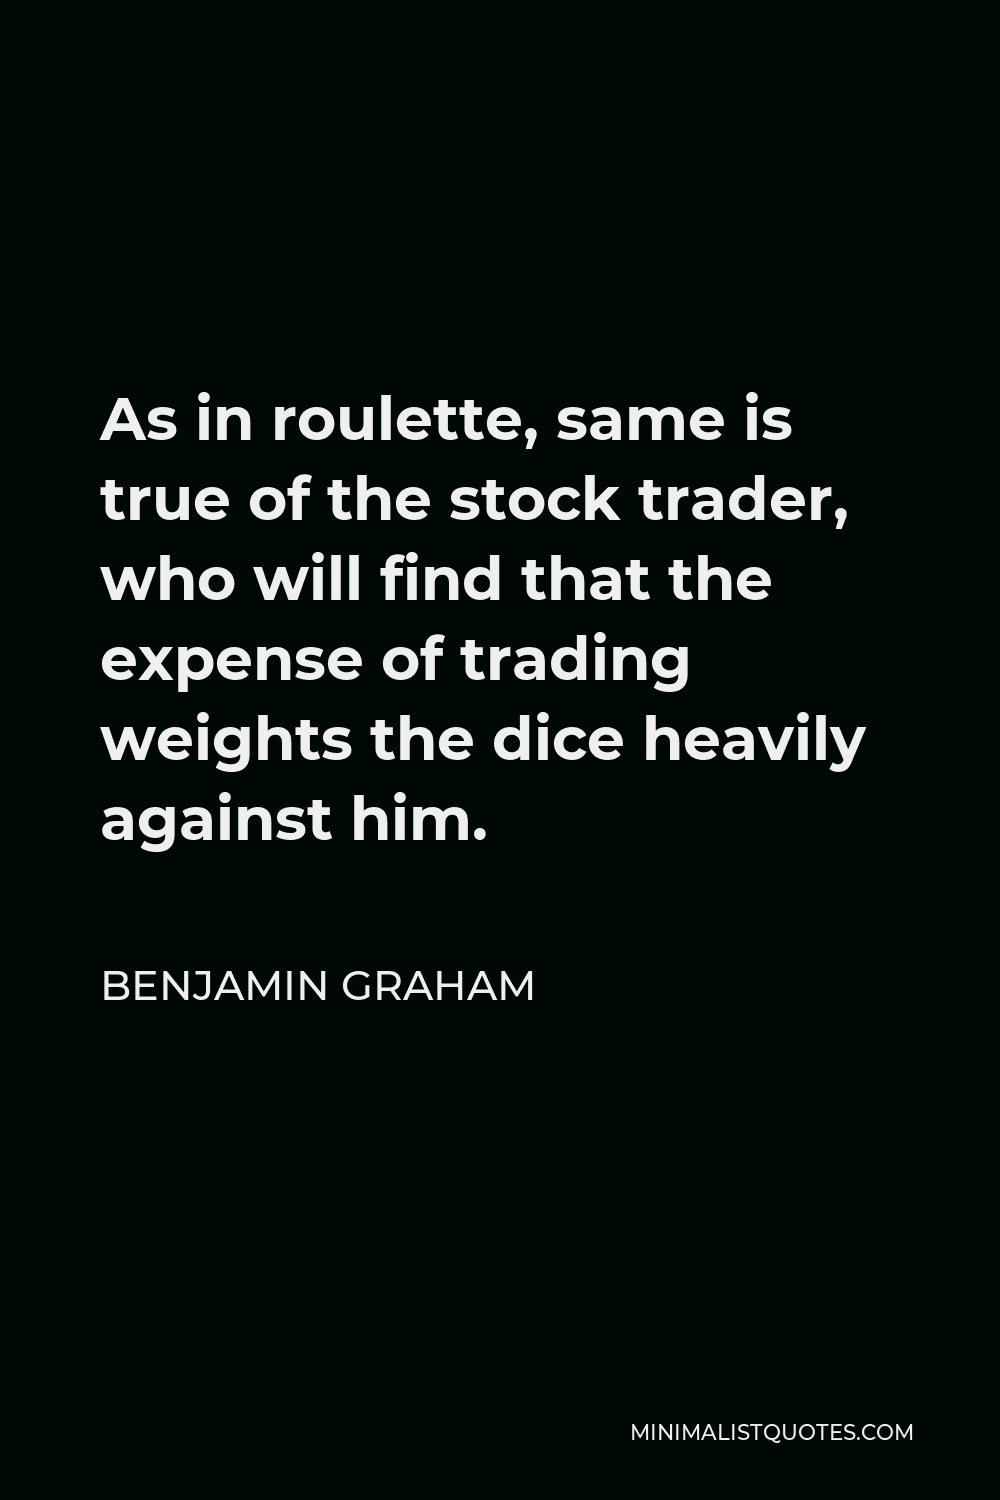 Benjamin Graham Quote - As in roulette, same is true of the stock trader, who will find that the expense of trading weights the dice heavily against him.